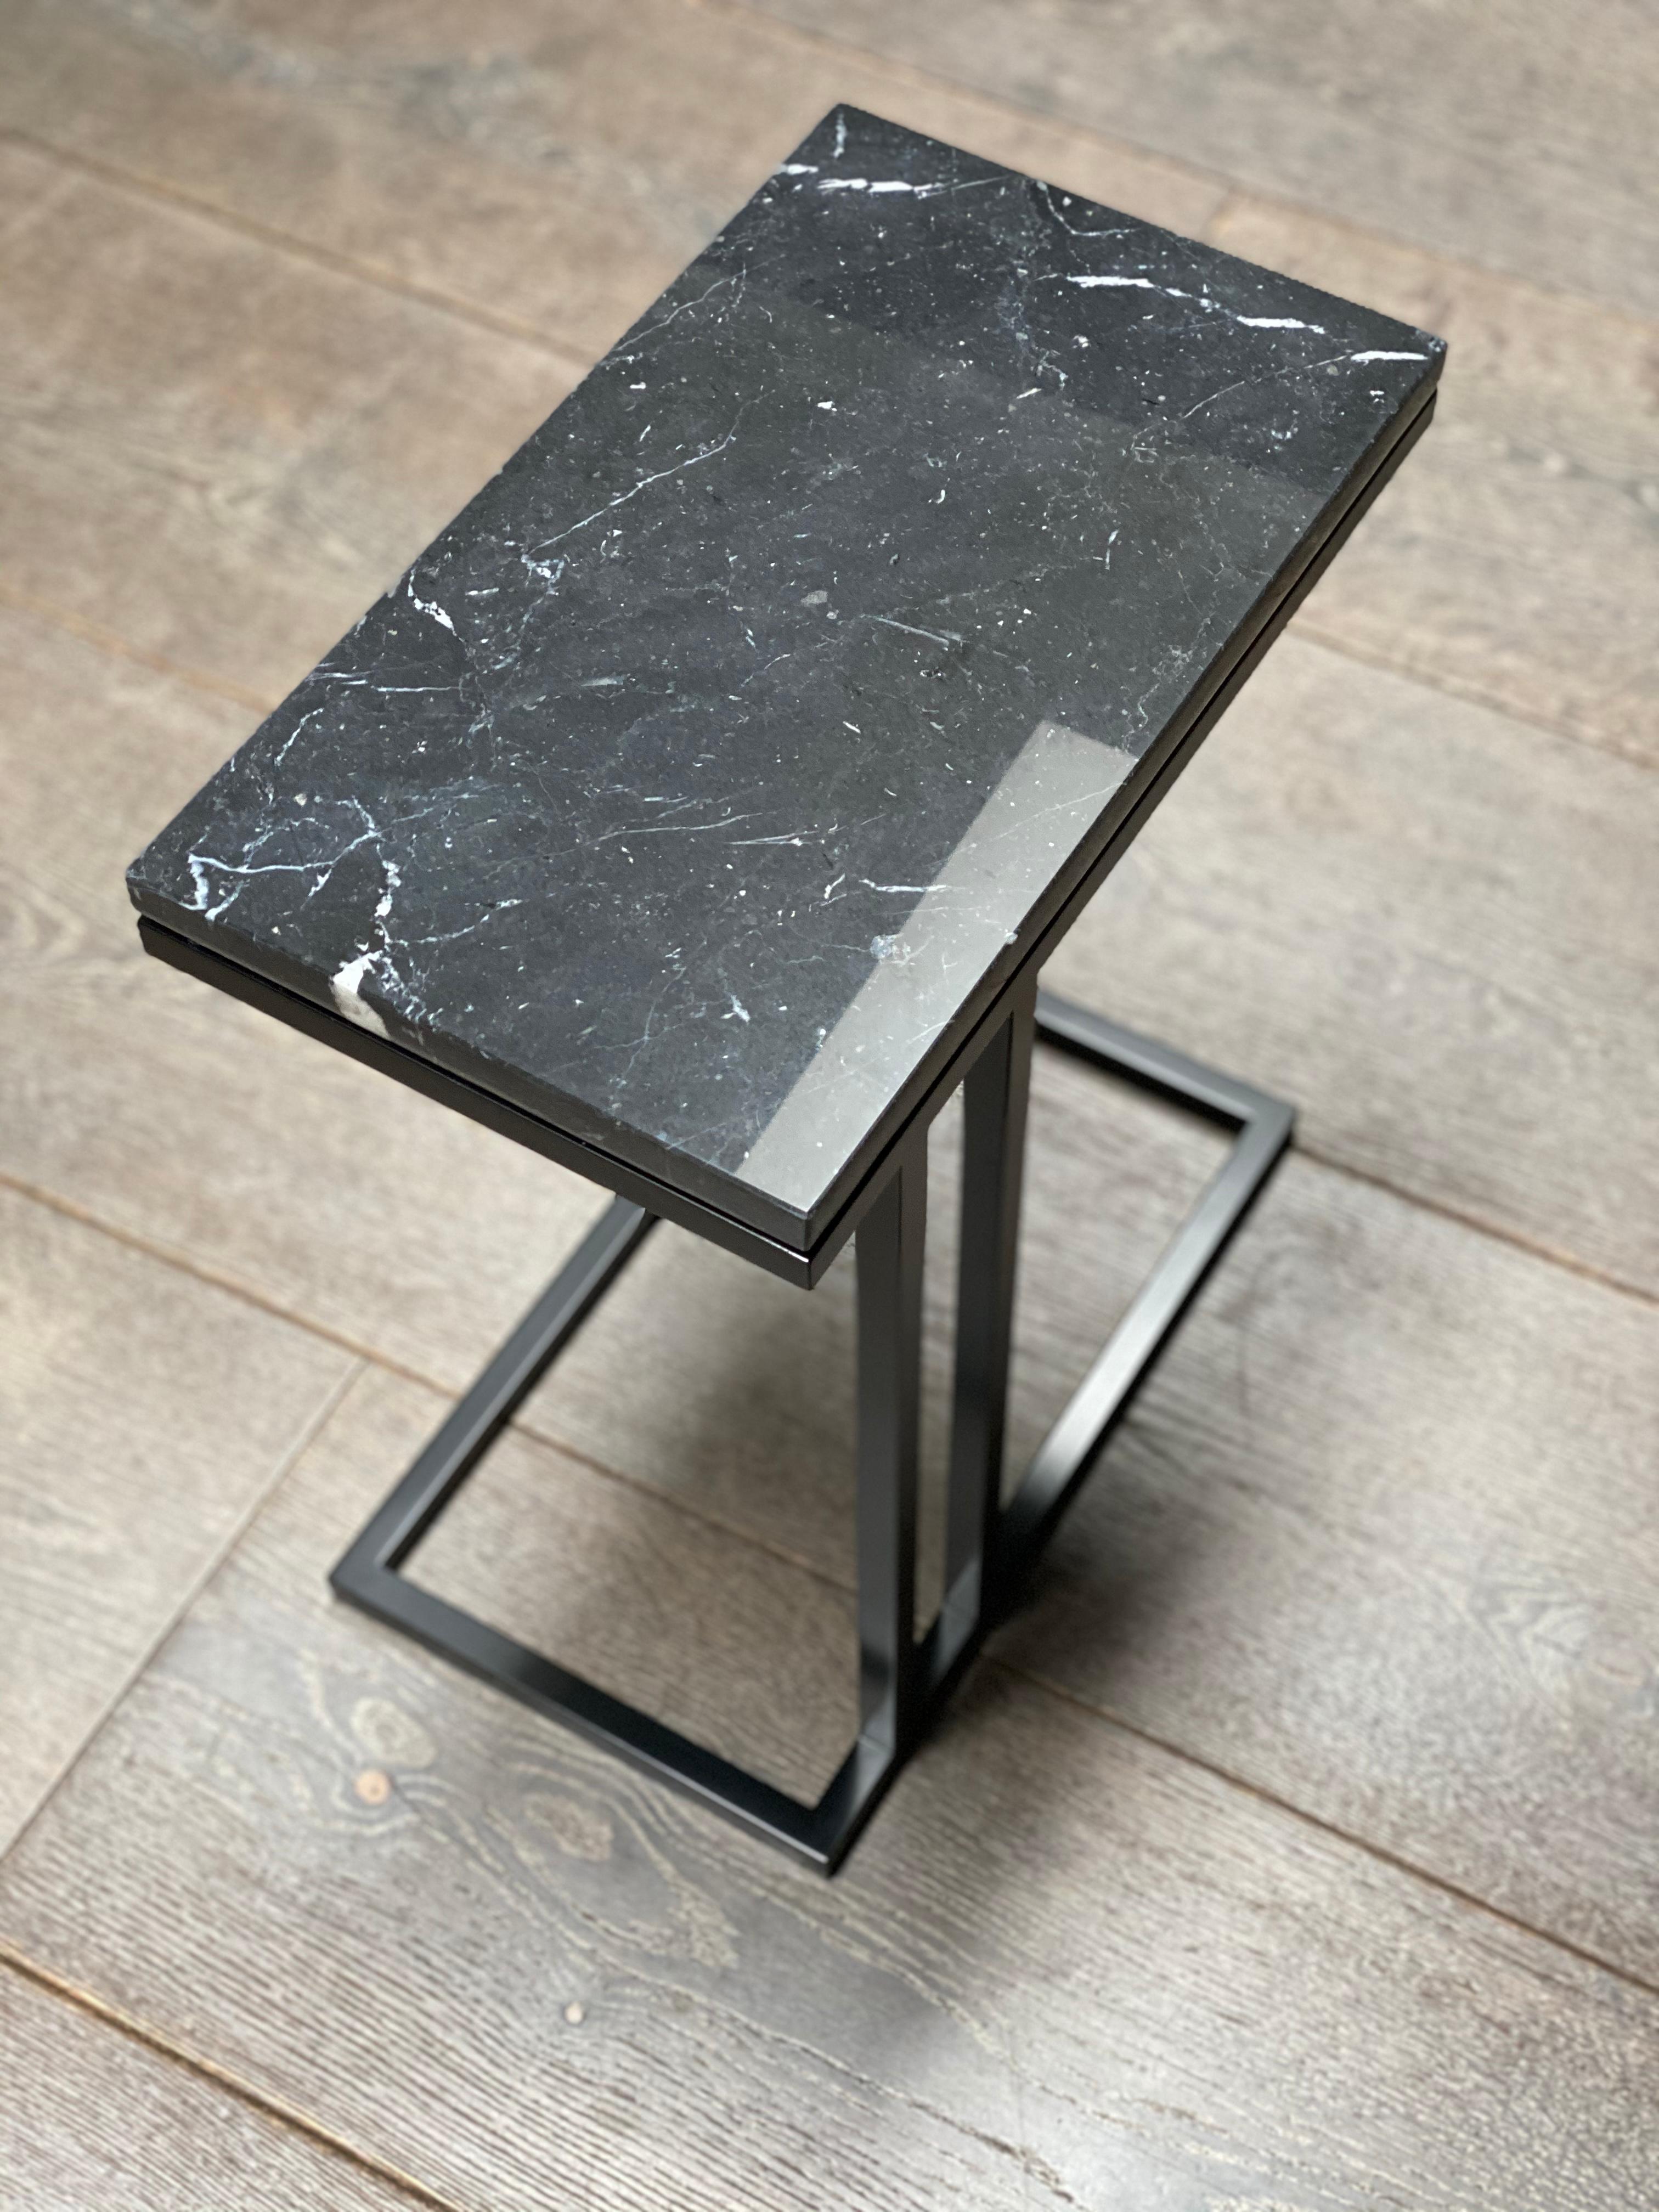 Inspired by the Greek God, Helios, the Elio collection’s signature symmetrical leg design embodies the Gods’ powerful, masculine persona. With 4, slender vertical columns, masterfully connected by the tabletop and base frame, the Elio frame has a